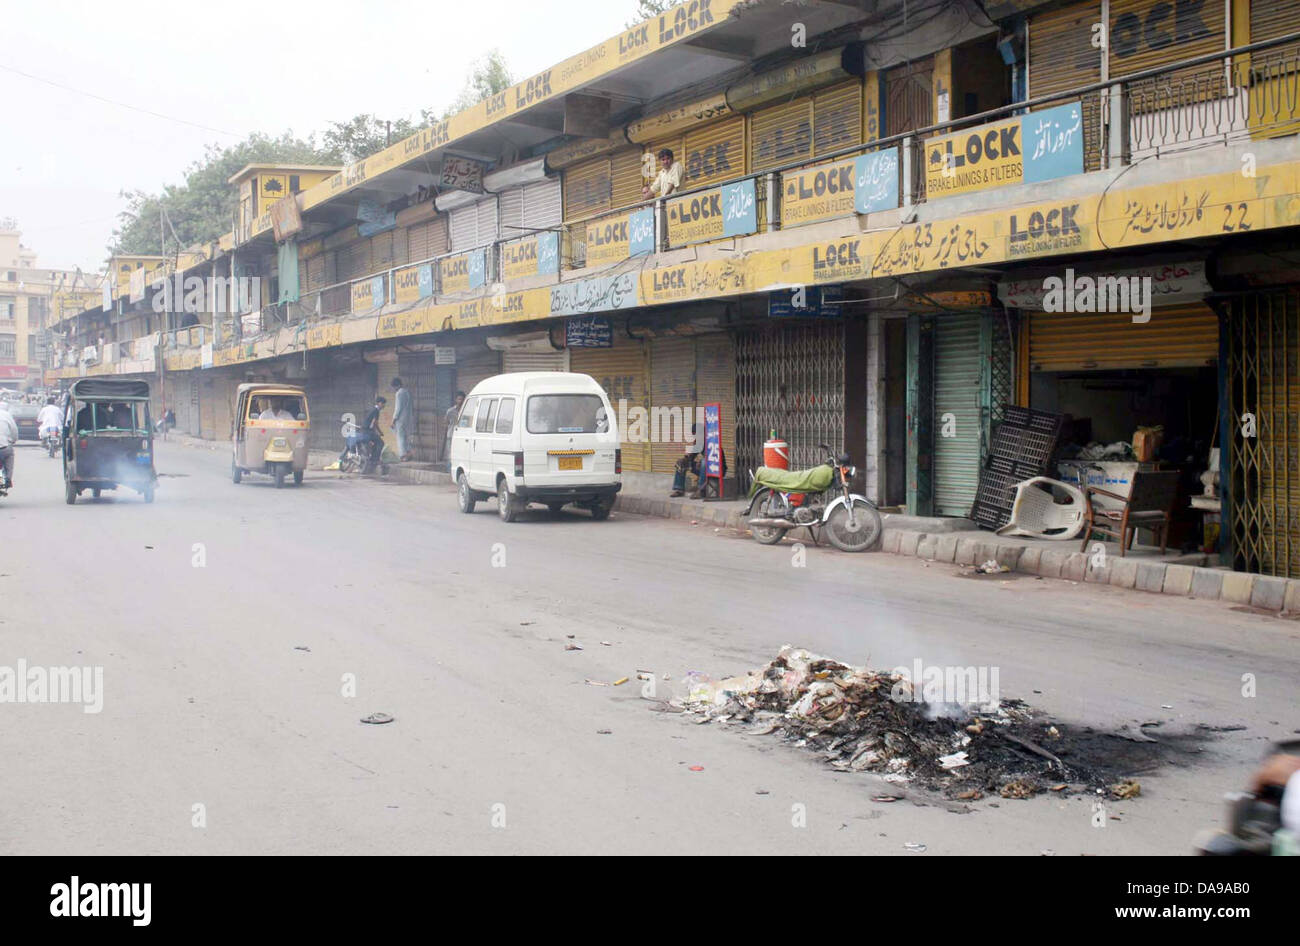 Garden Auto Parts markets seen closed during strike called by shopkeepers against dacoities and extortion mafia, in Karachi on Monday, July 08, 2013. Stock Photo